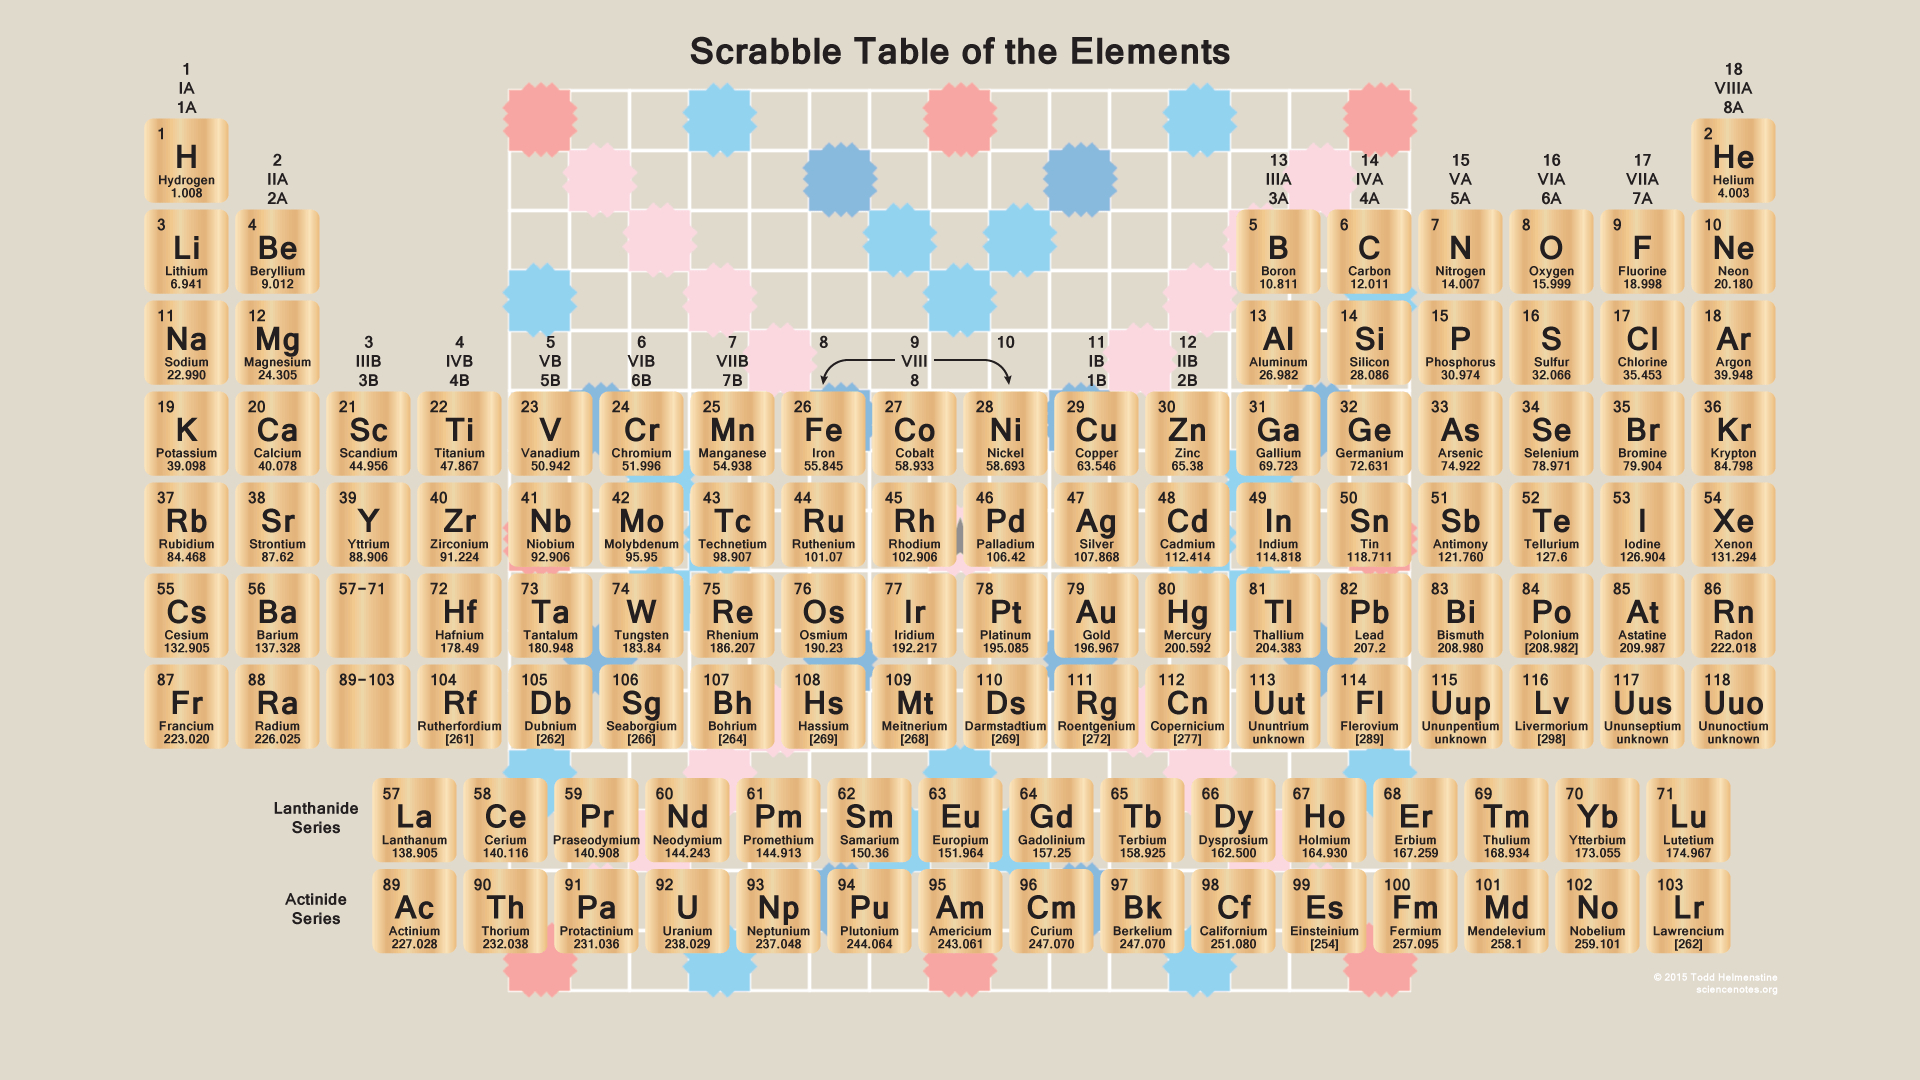 1920x1080 Scrabble Periodic Table | Periodic table, Periodic table of the elements, Scientific calculator